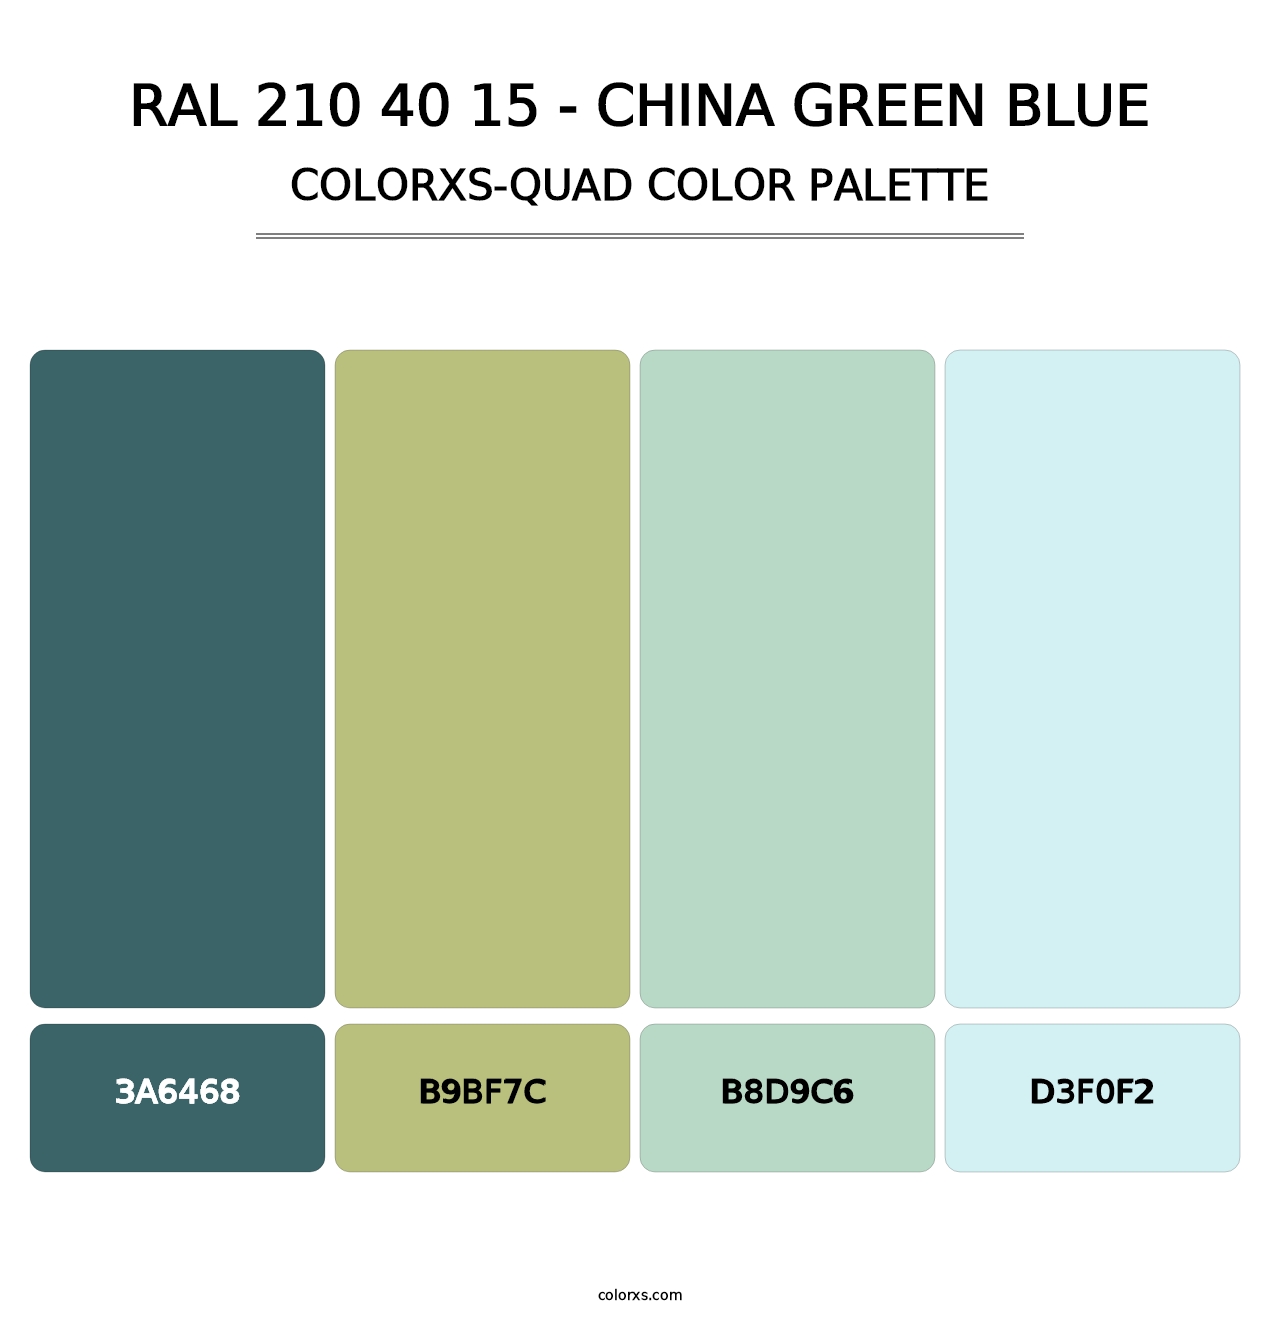 RAL 210 40 15 - China Green Blue - Colorxs Quad Palette